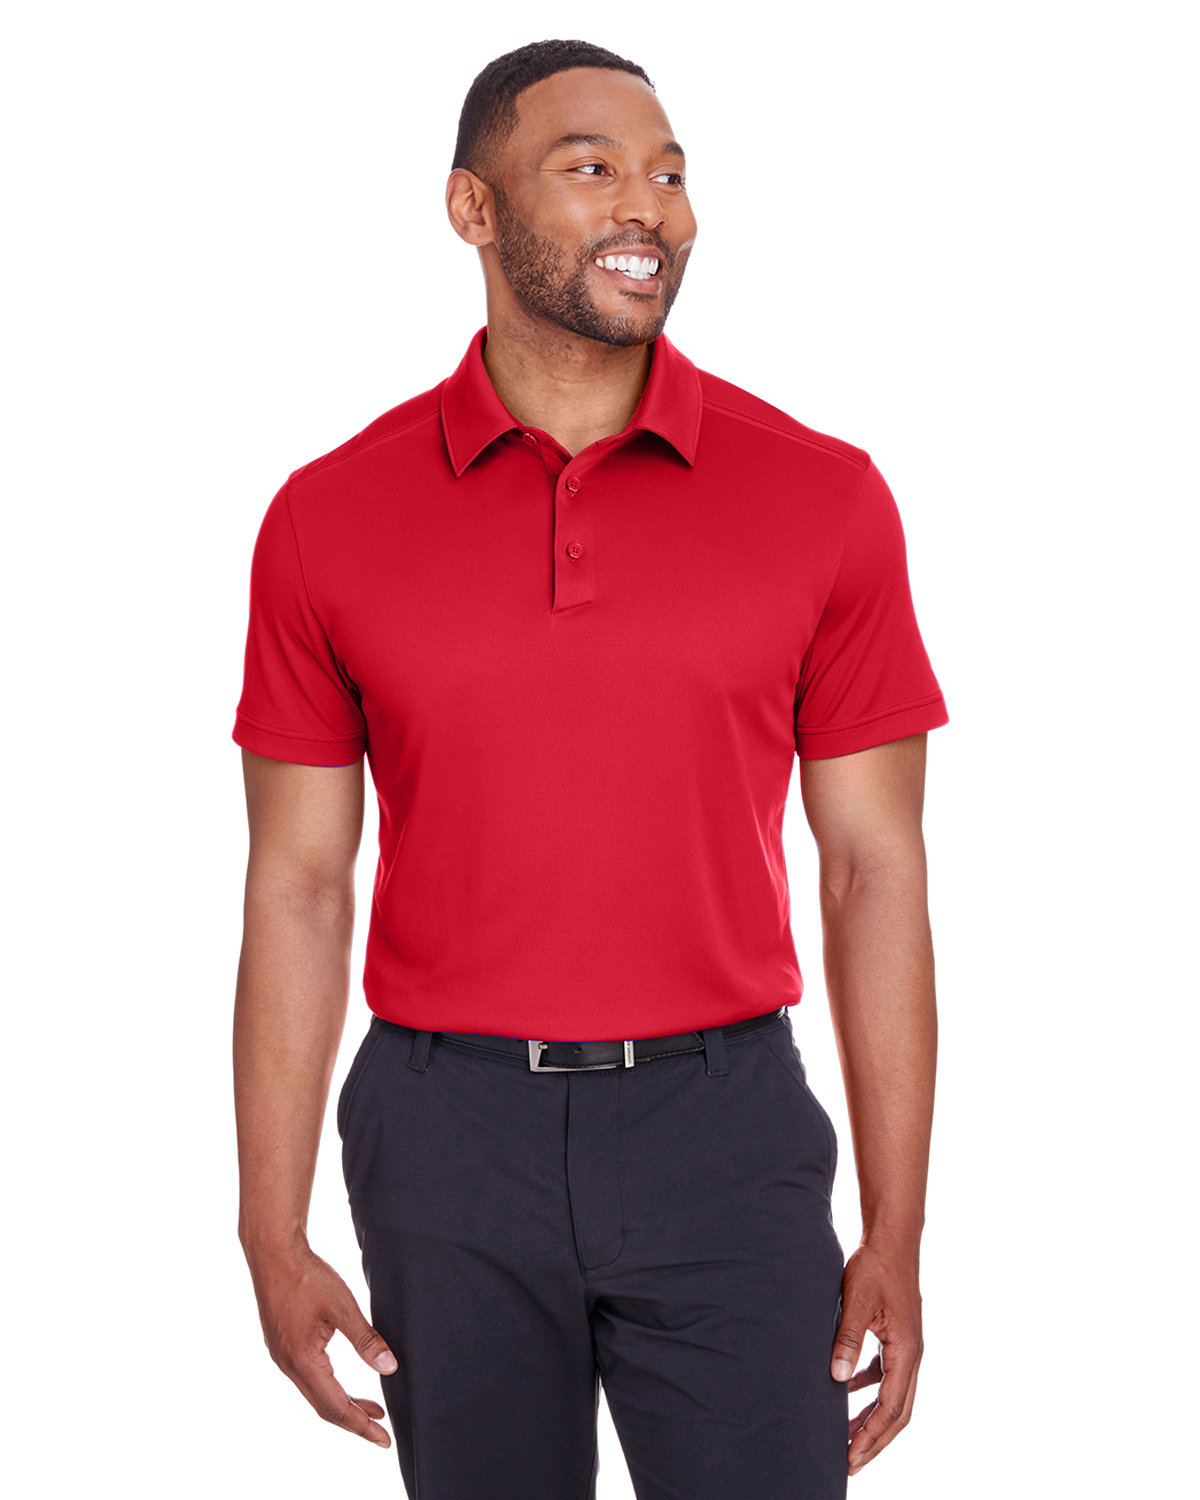 Spyder Men's Freestyle Polo RED 